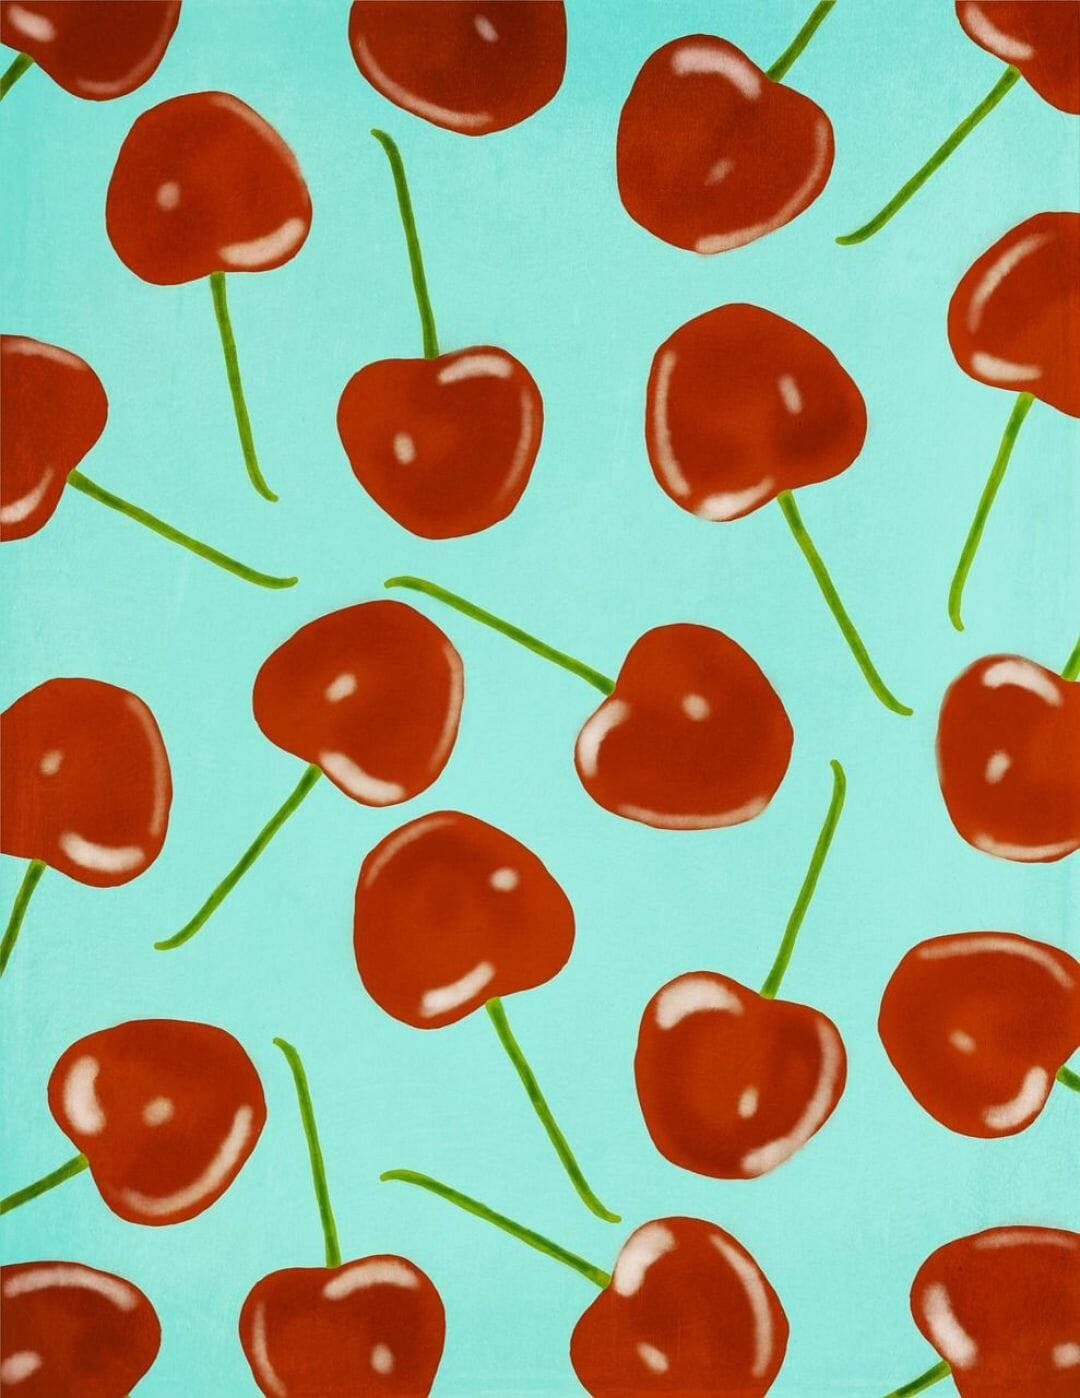 A Painting Of Cherries On A Turquoise Background Wallpaper